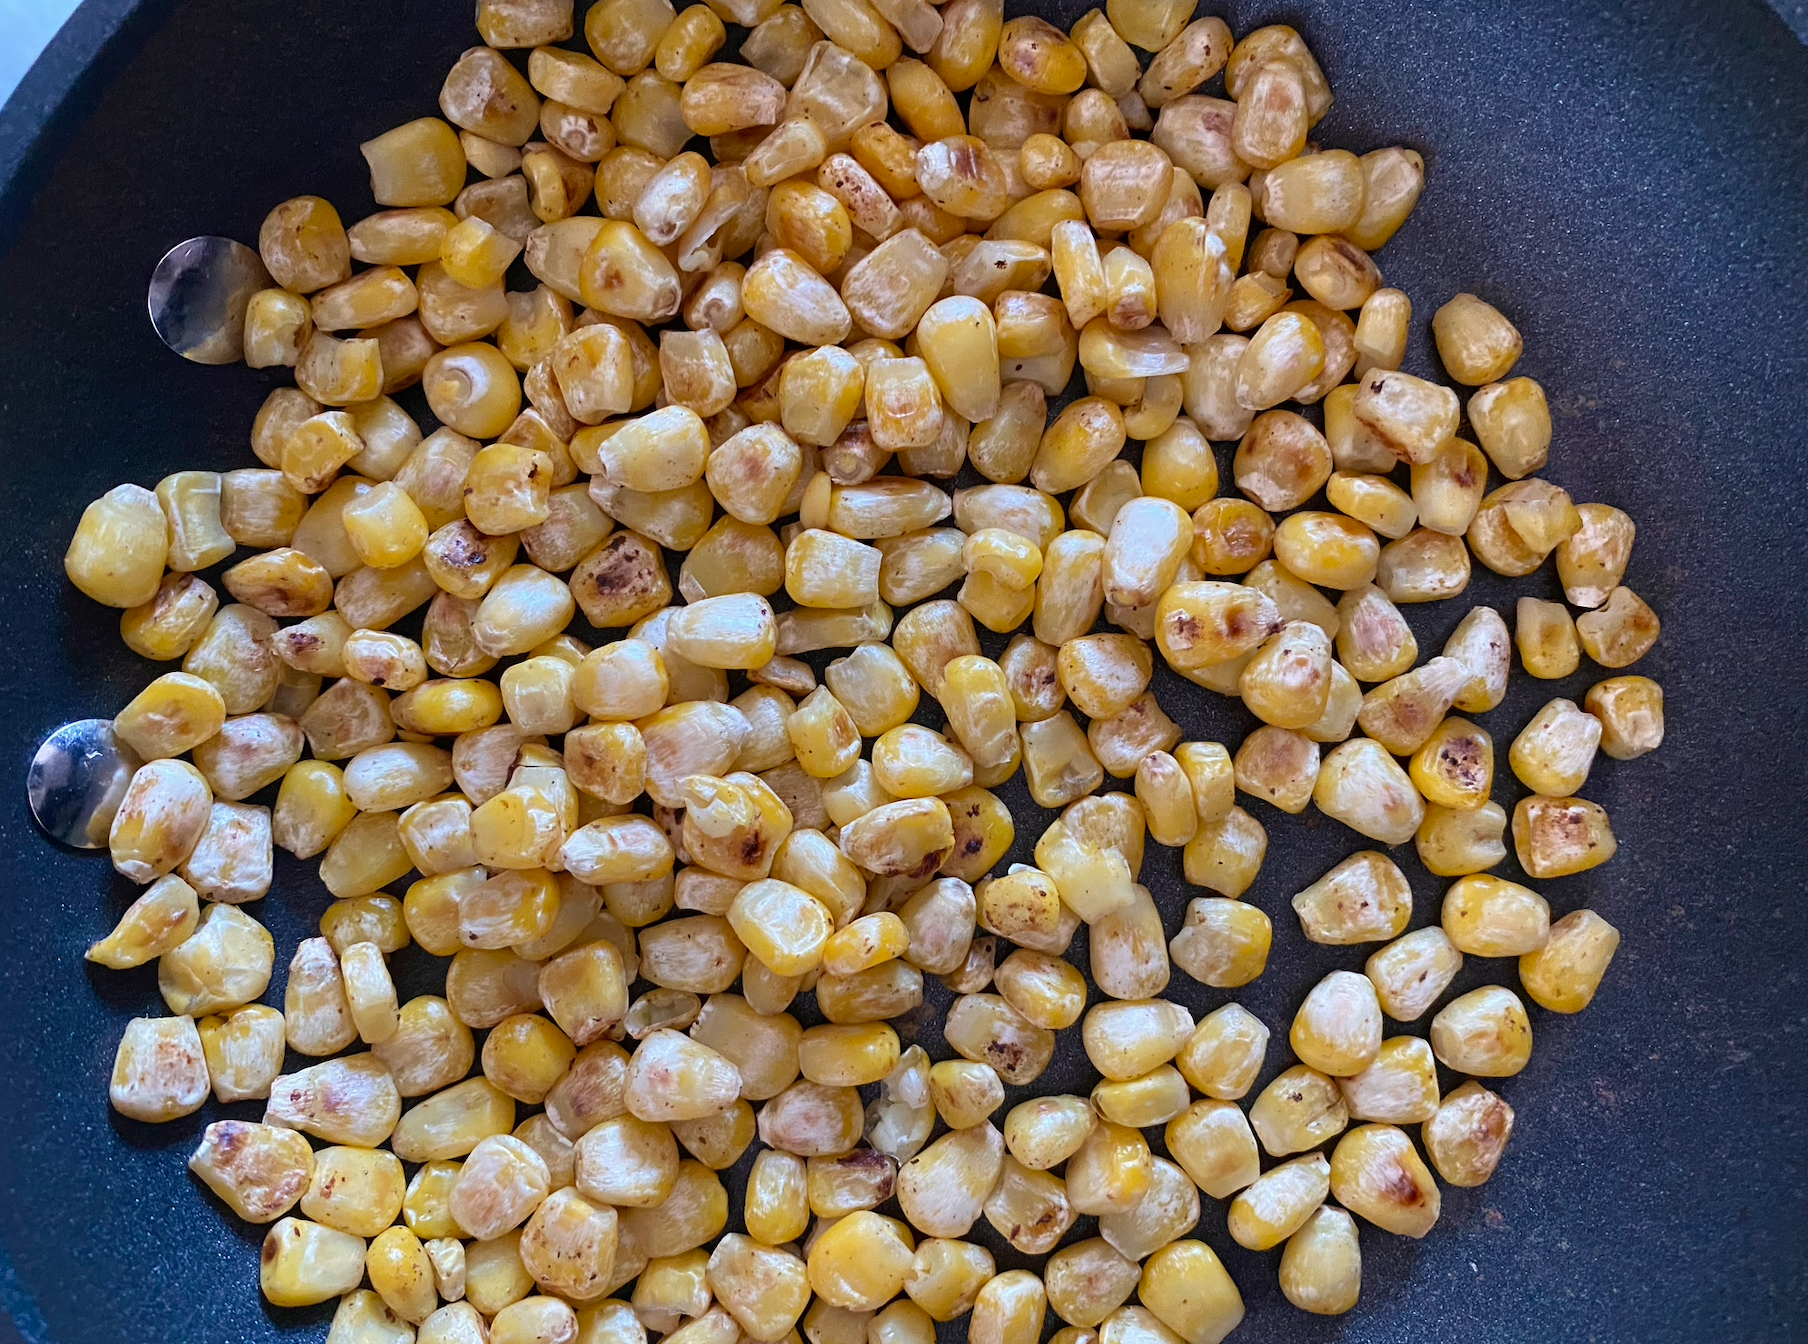 Corn dry-roasted, before food processing half of the kernels. (Photo: Allie Chanthorn Reinmann)